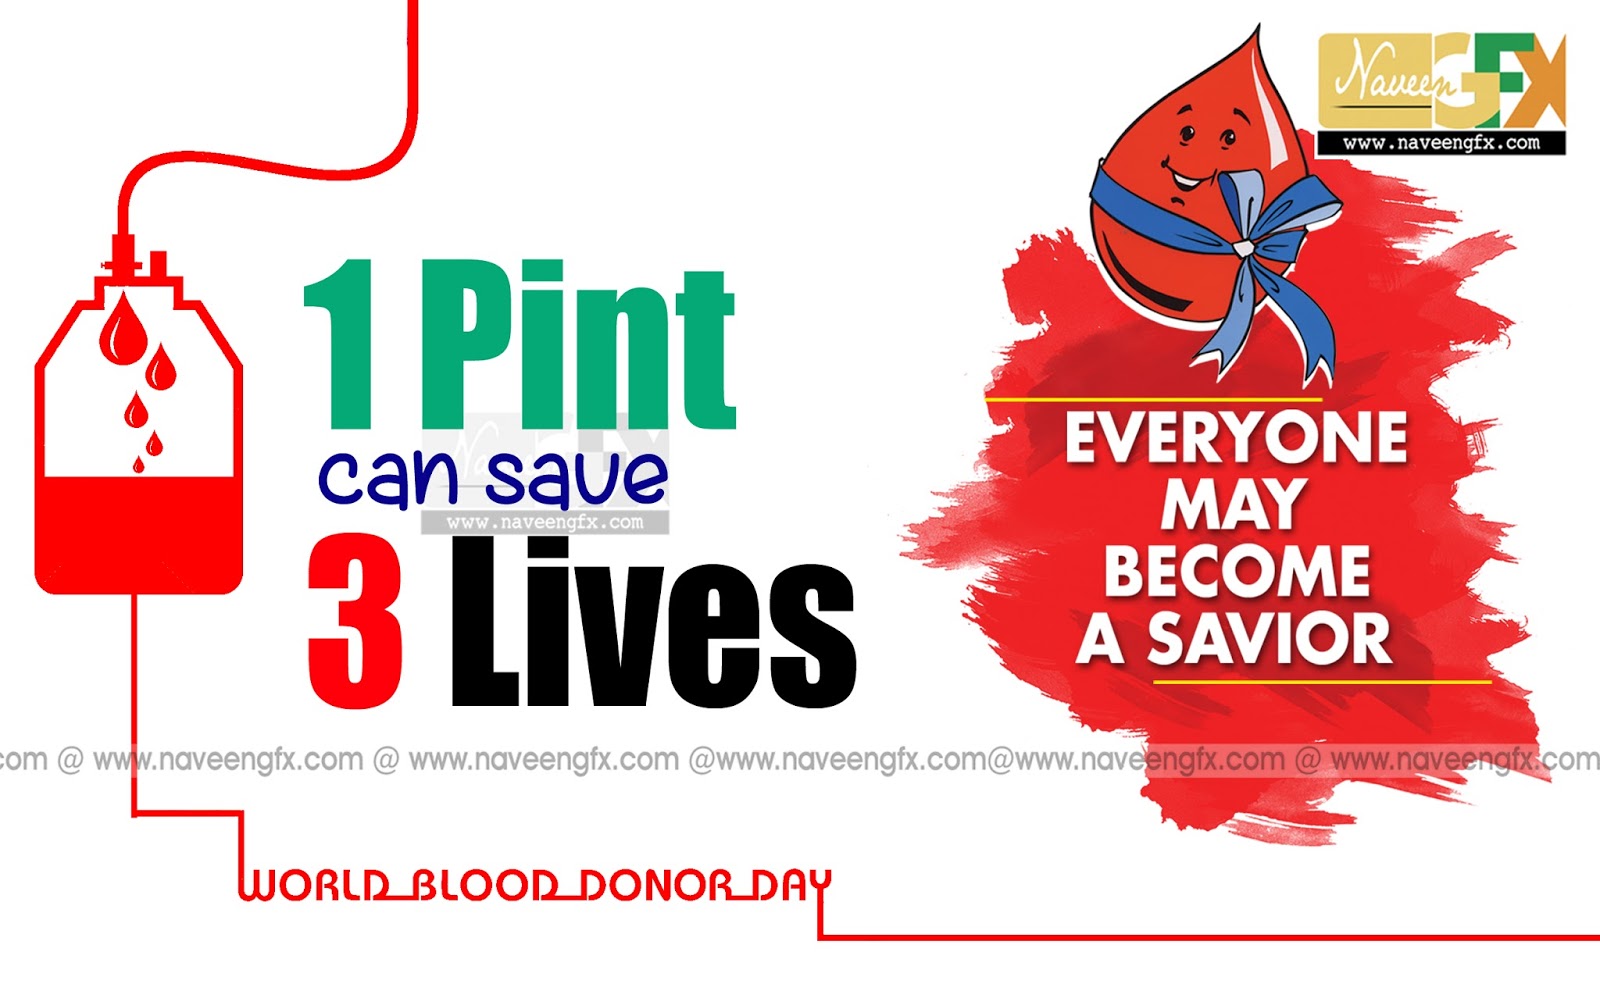 world blood donors day slogans and posters | naveengfx